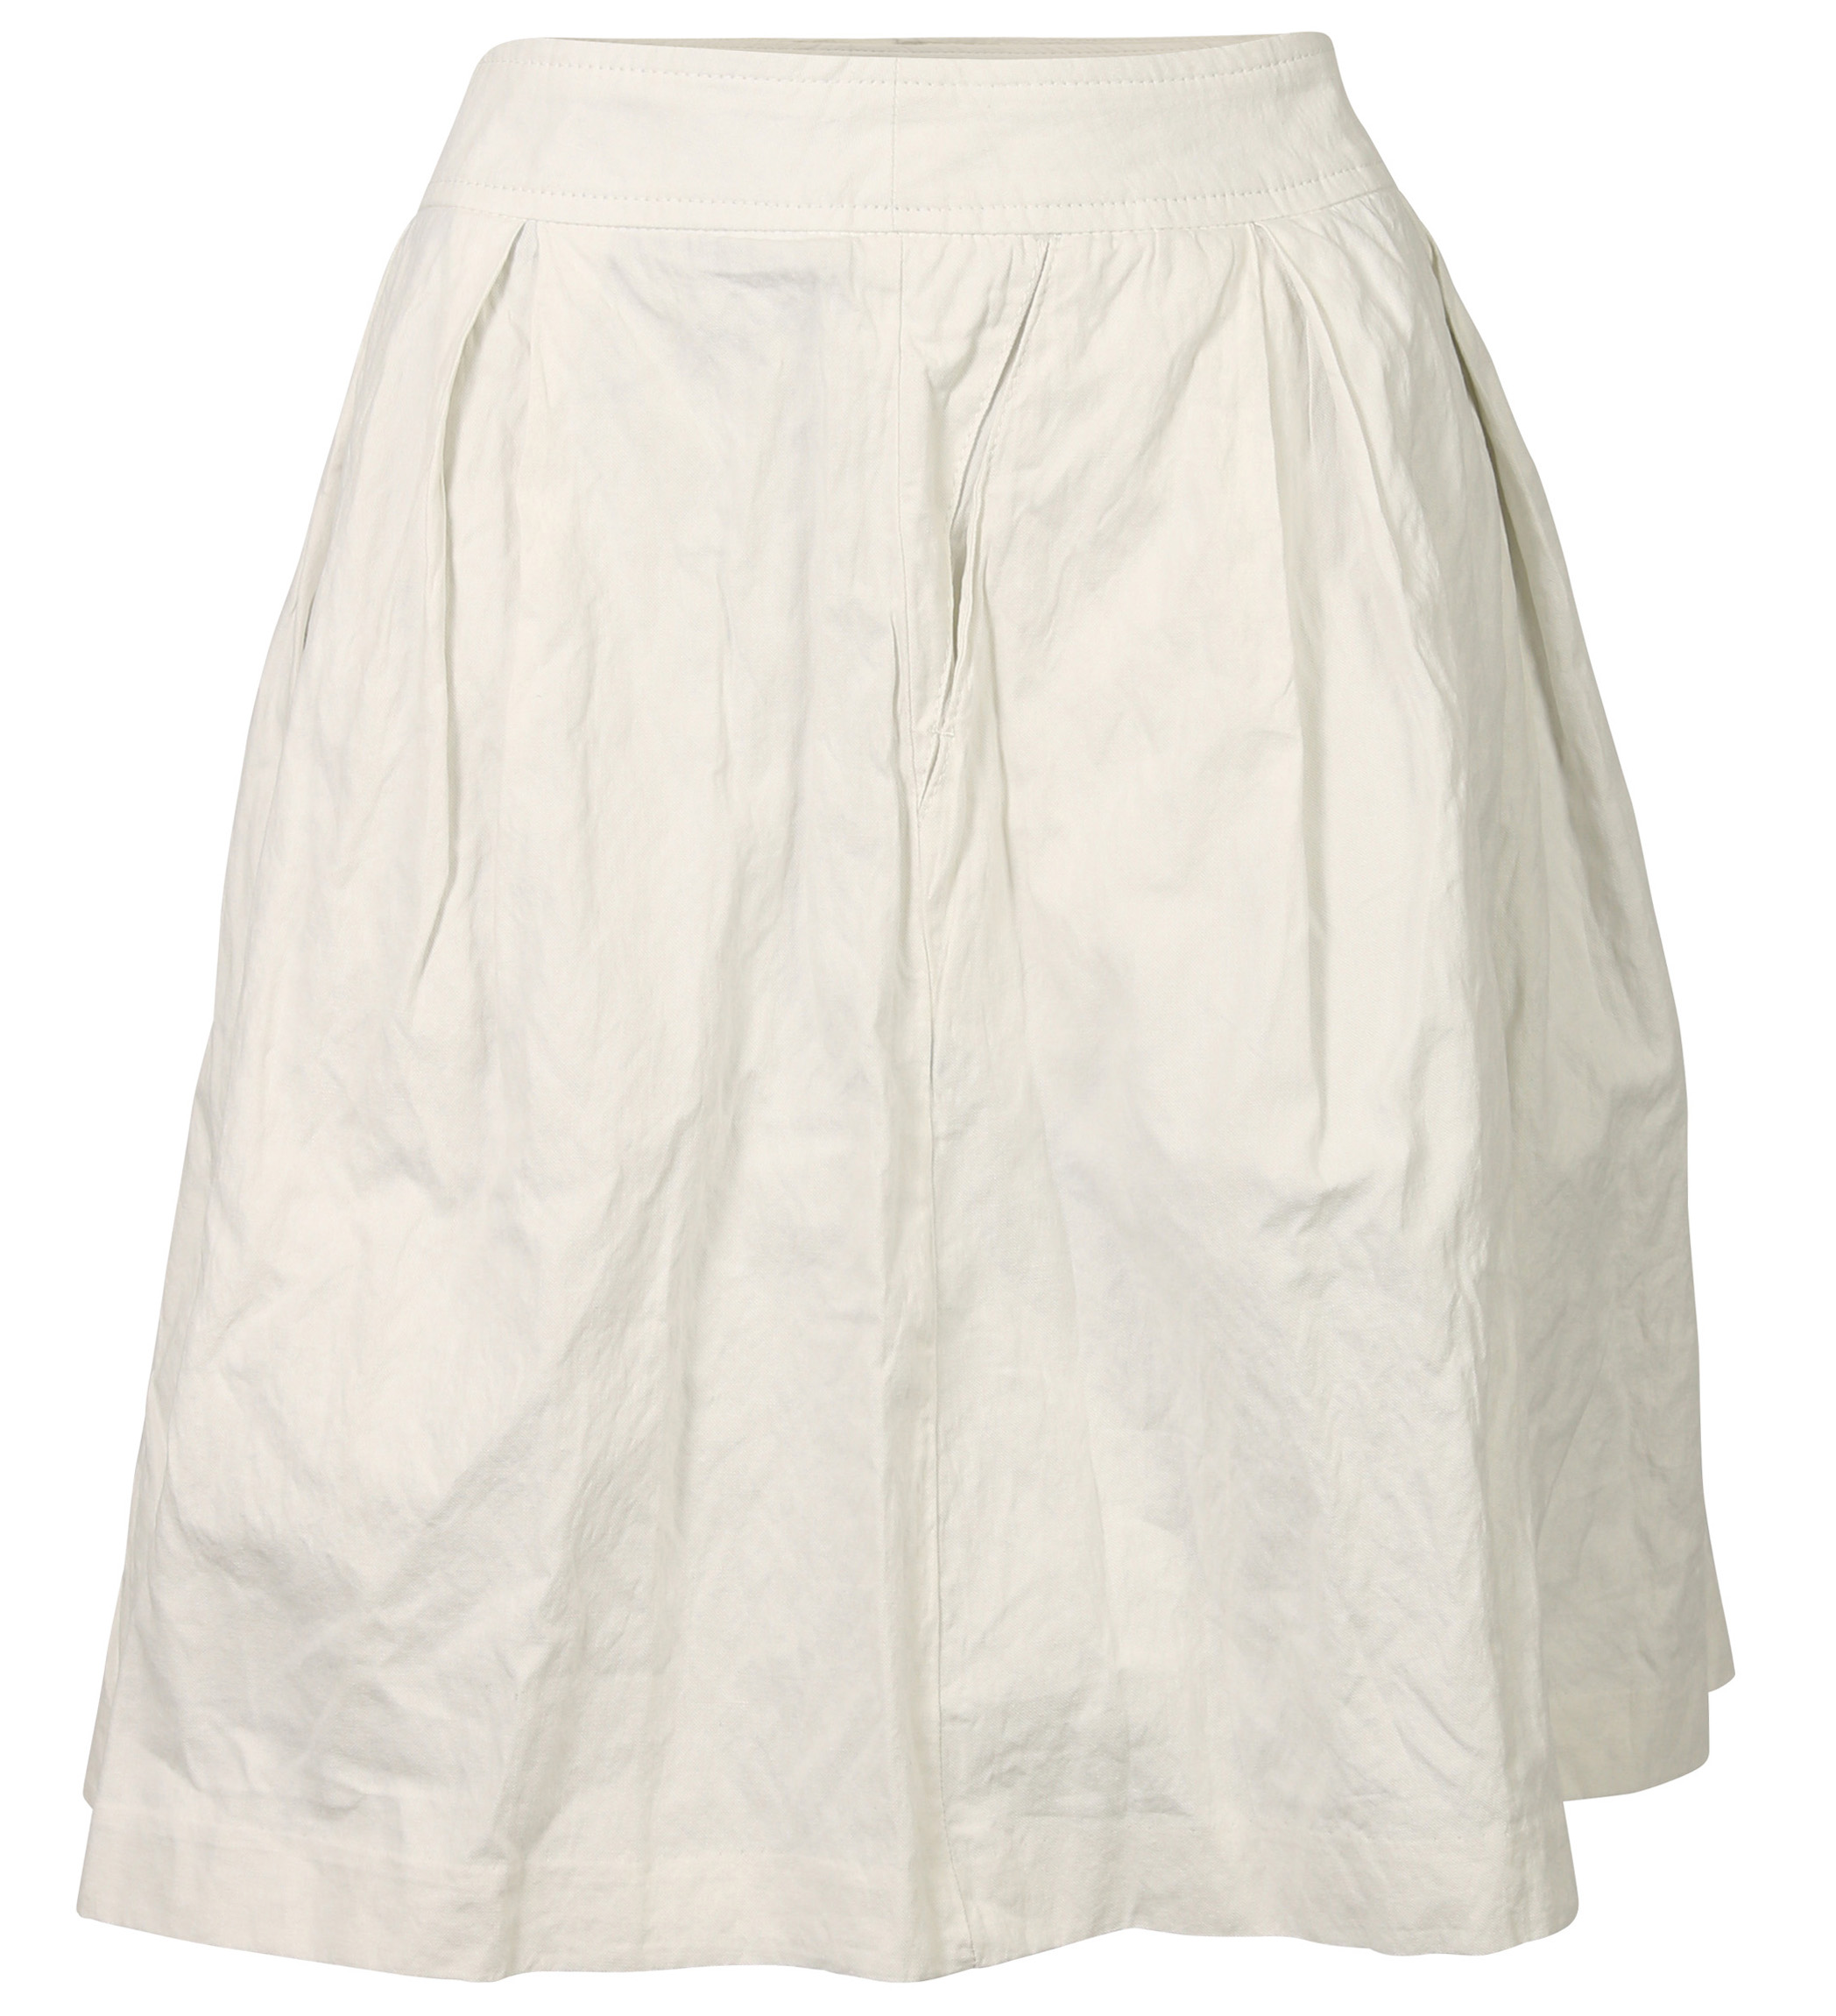 Hannes Roether Skirt Offwhite XL